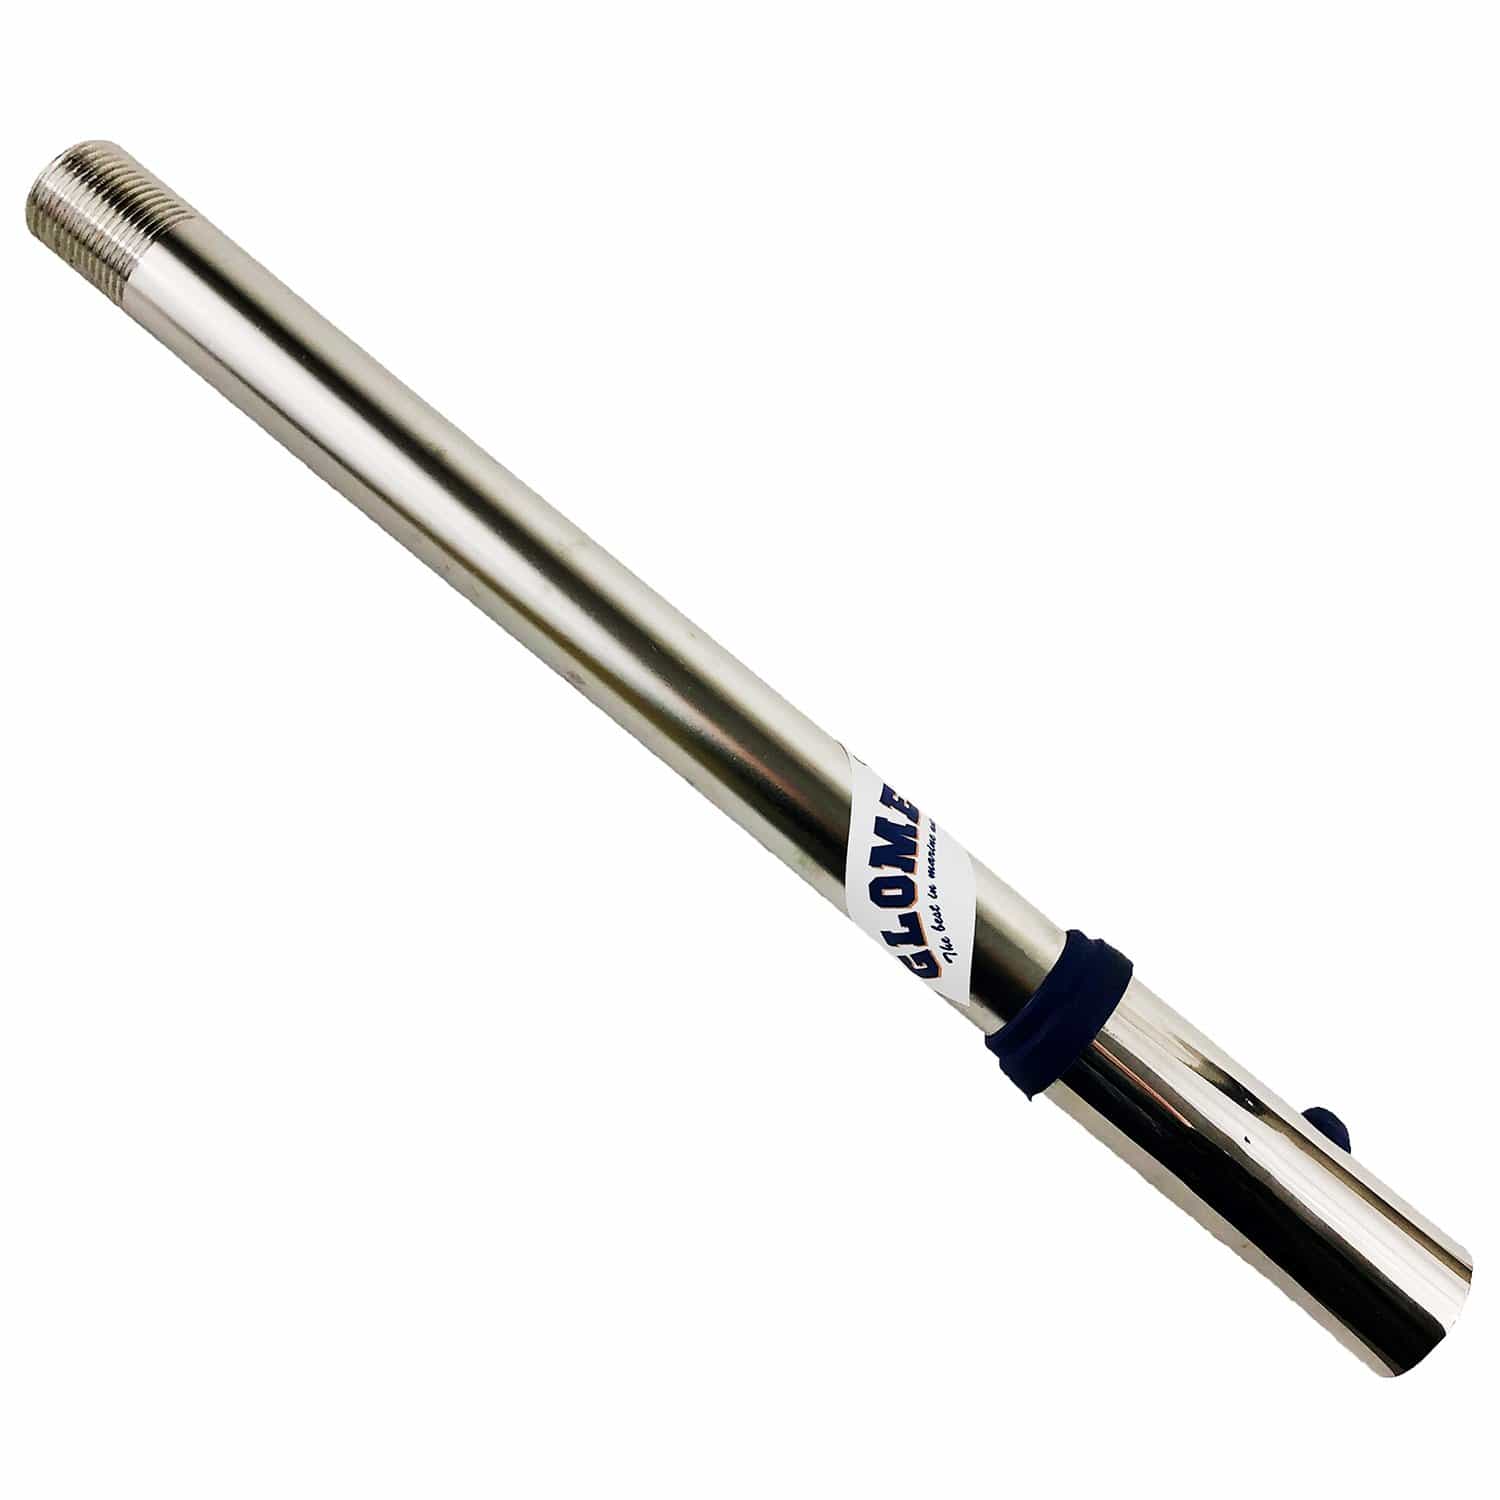 Glomex RA103/30 12" Stainless Steel Antenna Extension Mast